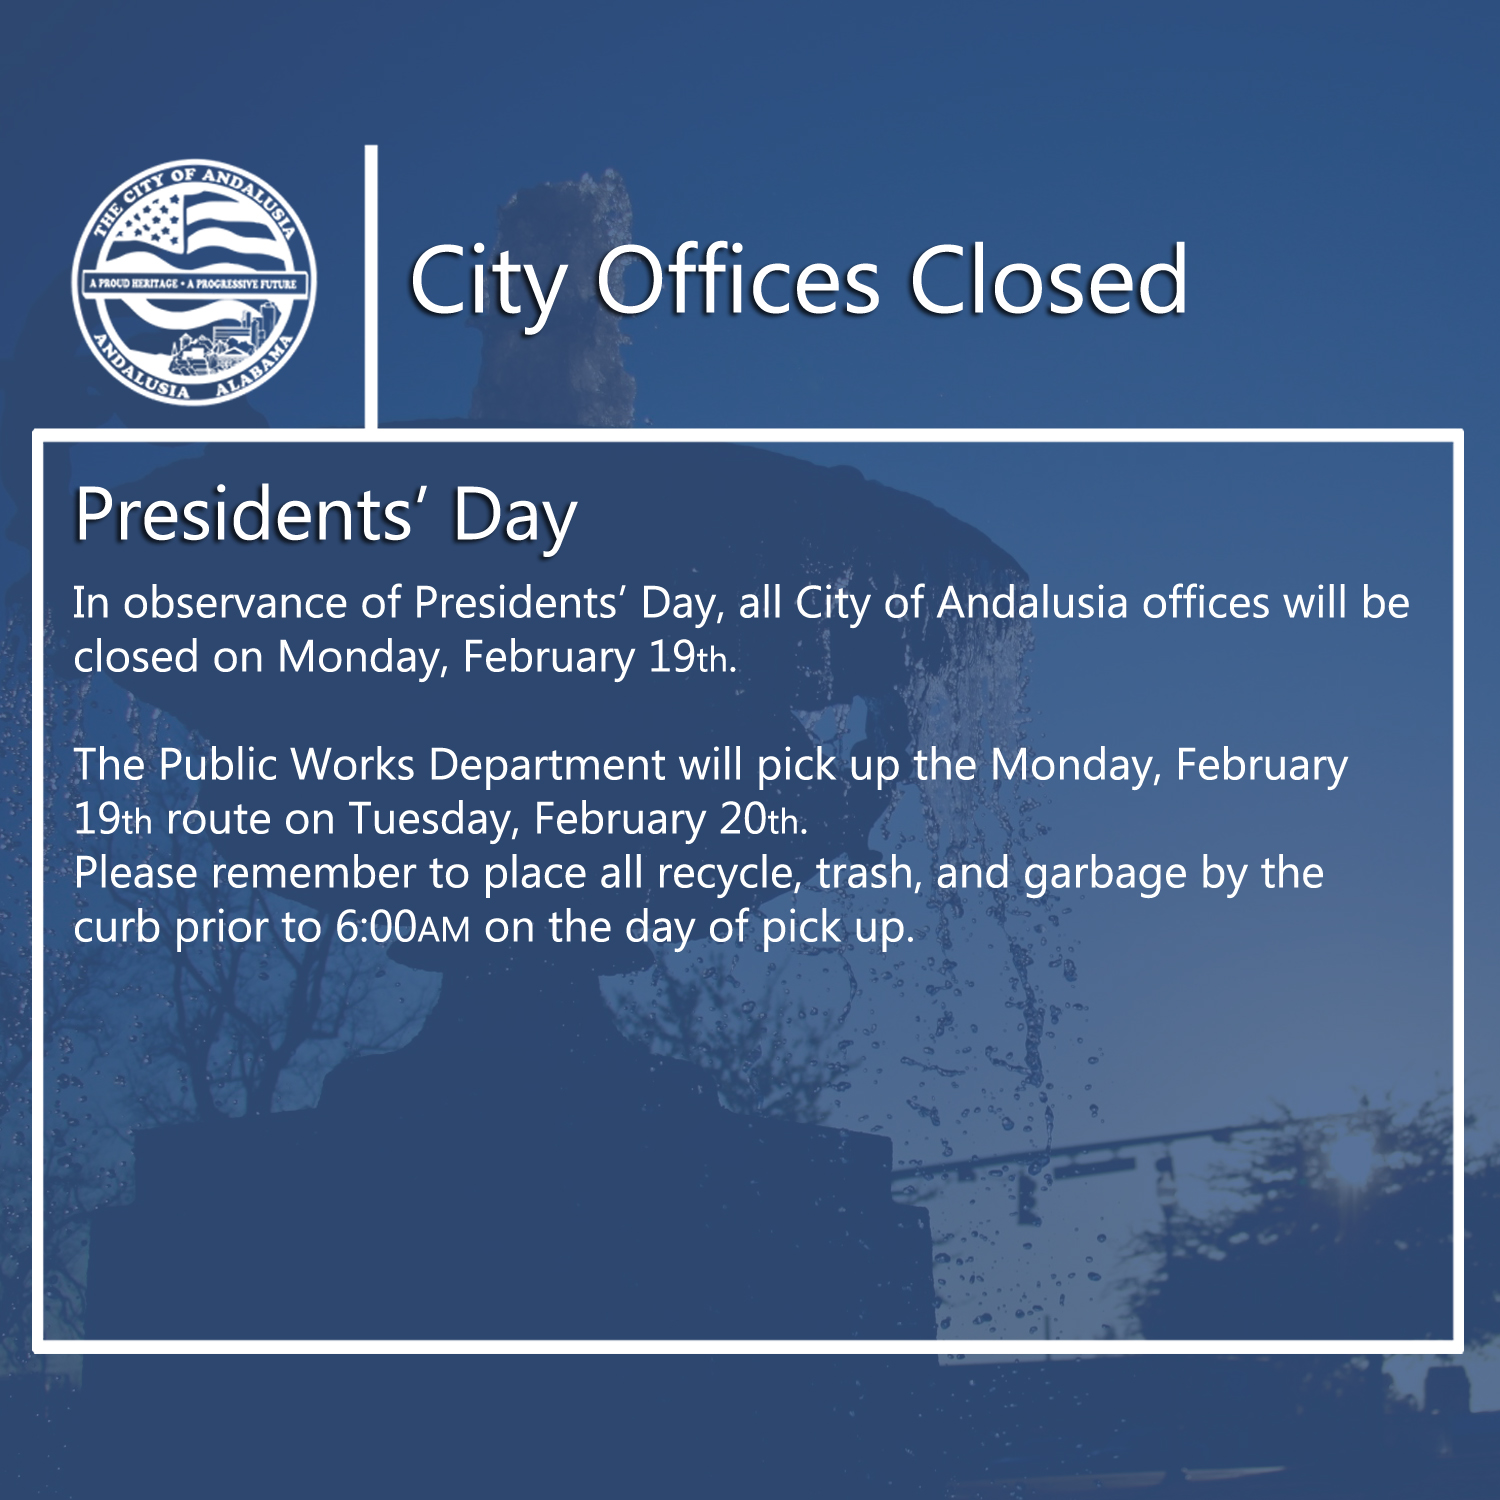 Facebook - City Offices Closed-Presidents Day.jpg